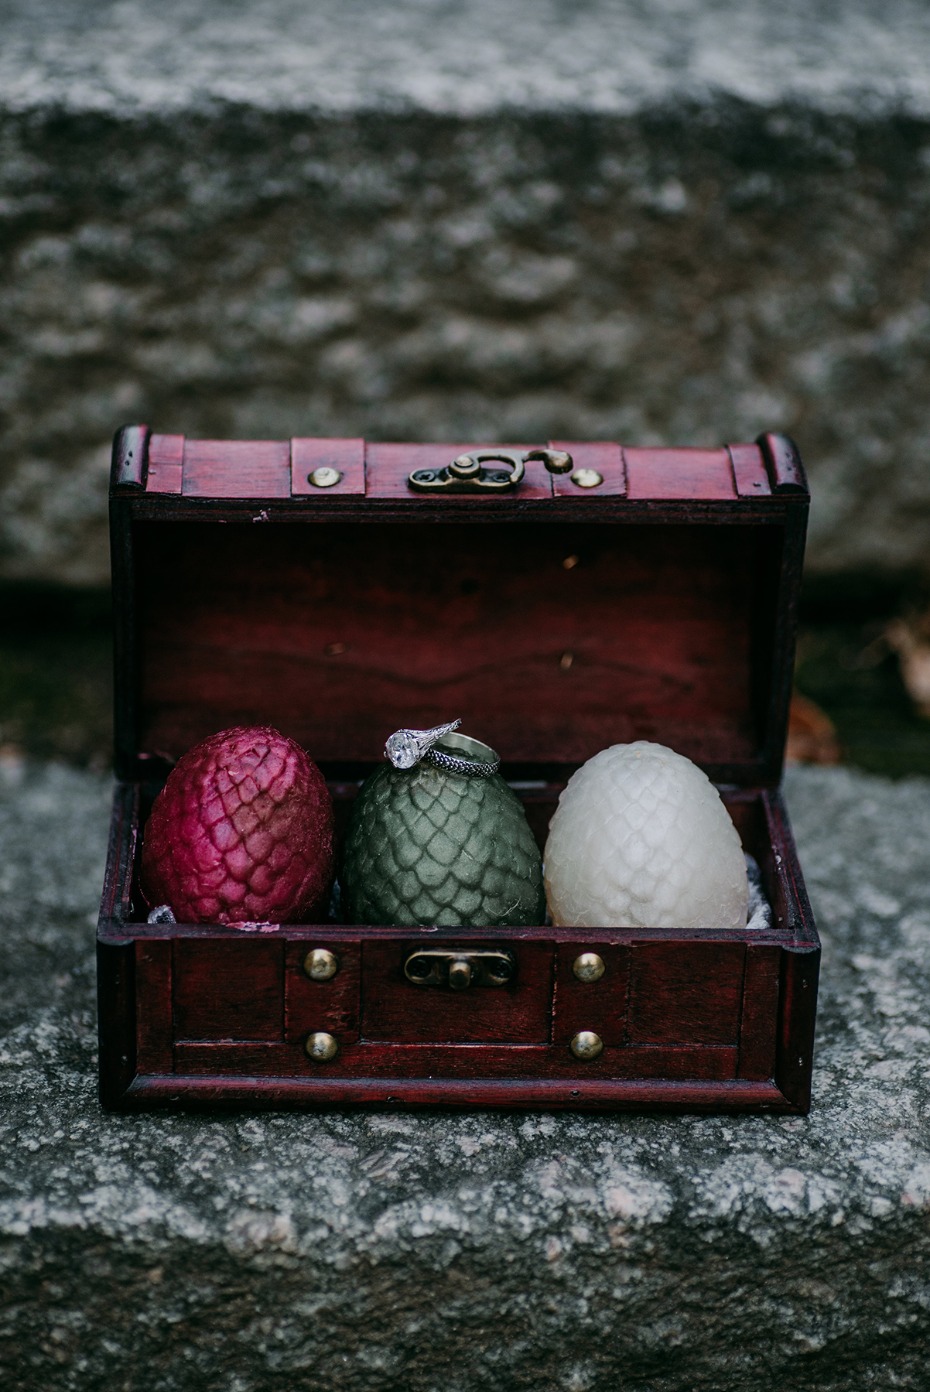 dragon egg candles for your game of thrones wedding favors